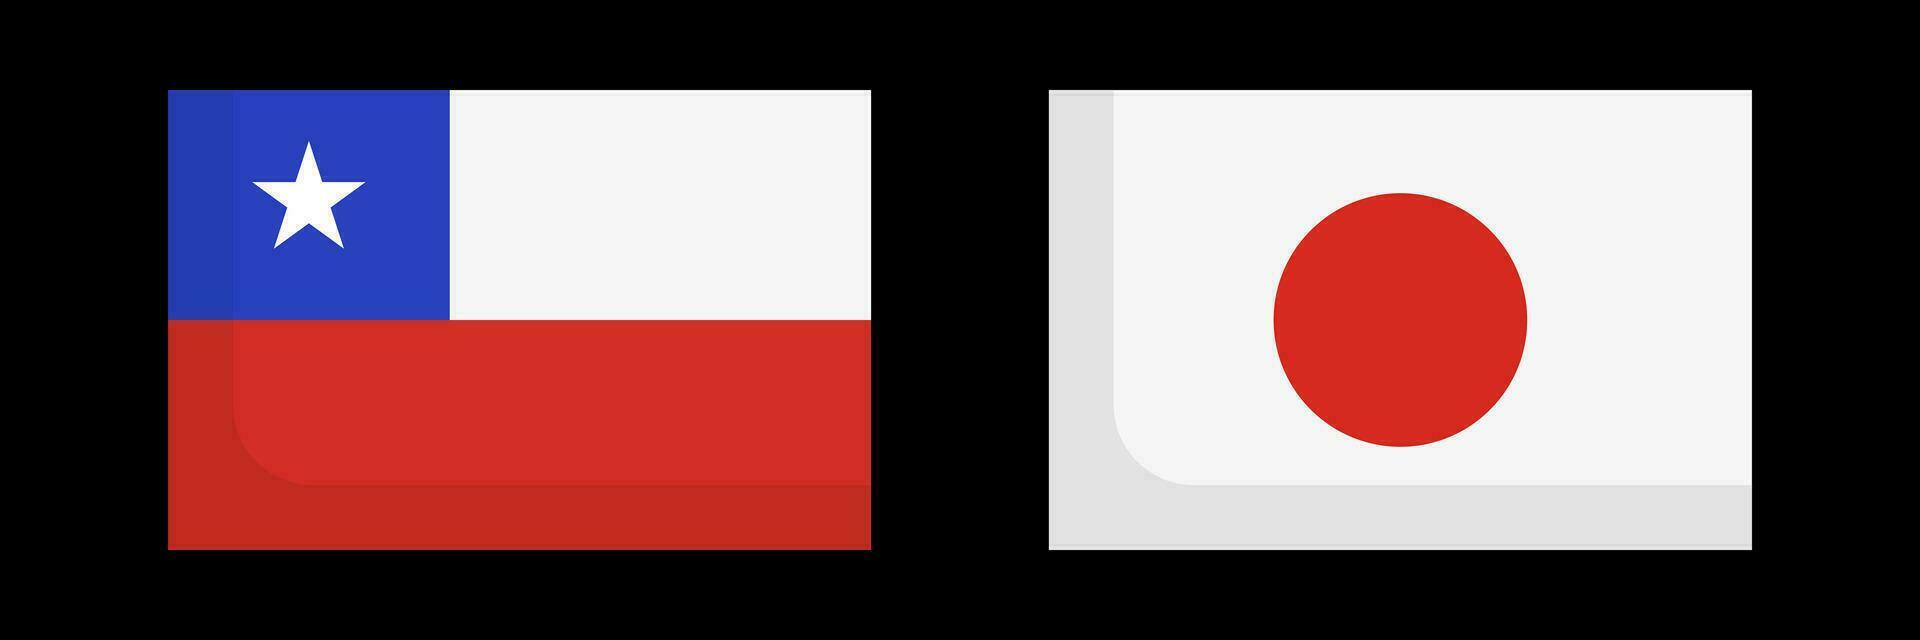 Chilean and Japanese flags icon set. Vector. vector